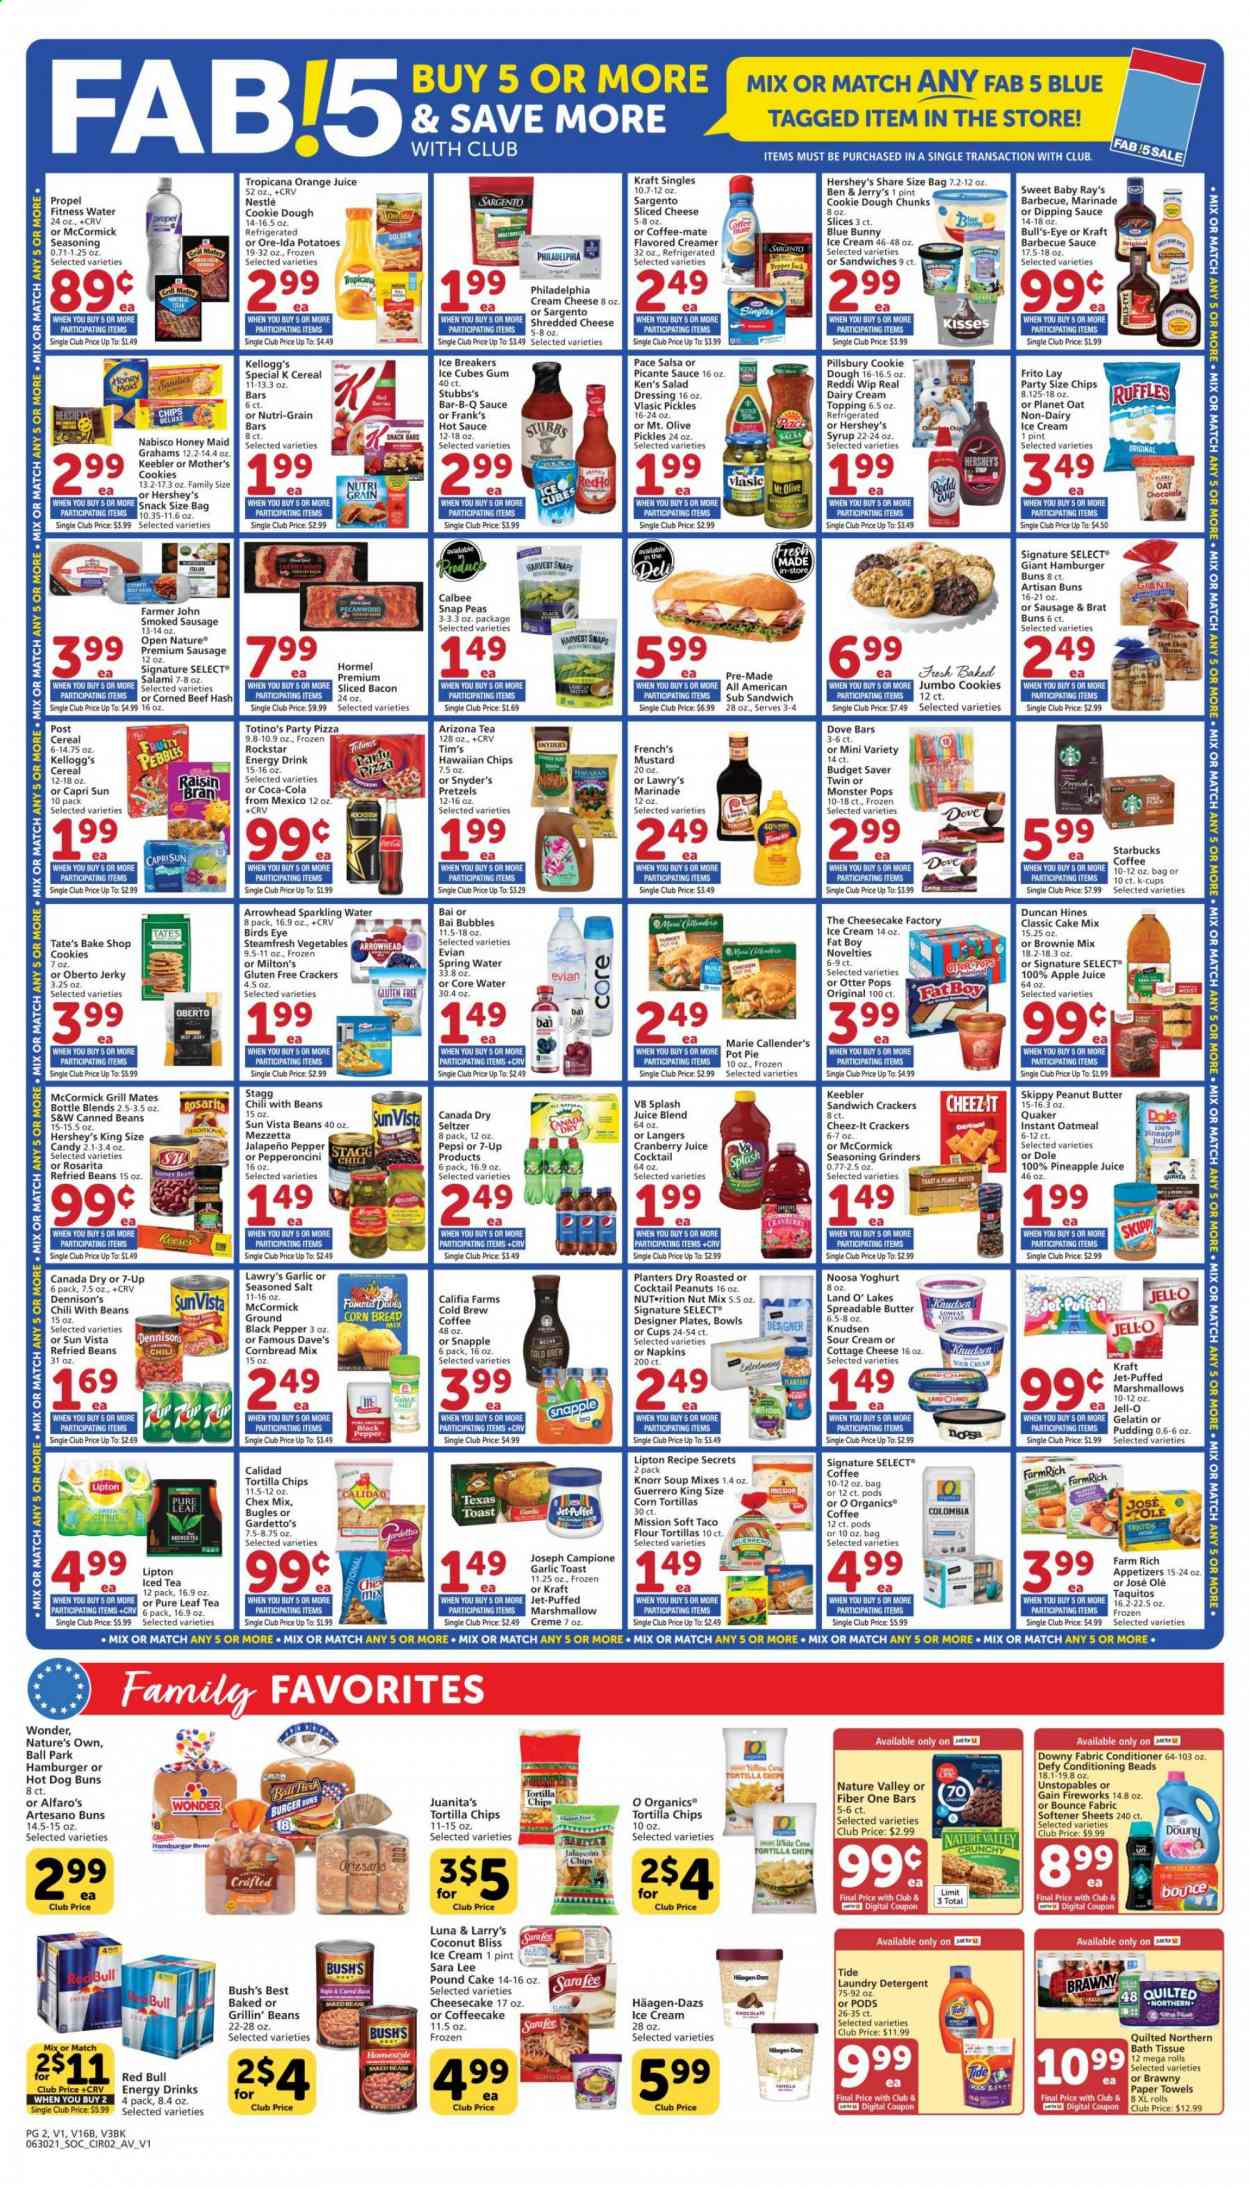 thumbnail - Albertsons Flyer - 06/30/2021 - 07/06/2021 - Sales products - snap peas, bread, corn tortillas, pretzels, corn bread, buns, burger buns, Sara Lee, flour tortillas, pot pie, coffee cake, pound cake, brownie mix, cake mix, potatoes, Dole, jalapeño, pineapple, beef hash, pizza, soup, Knorr, Pillsbury, Bird's Eye, Quaker, Marie Callender's, taquitos, Kraft®, Hormel, bacon, salami, jerky, sausage, smoked sausage, corned beef, cottage cheese, sandwich slices, shredded cheese, sliced cheese, Philadelphia, Pepper Jack cheese, Kraft Singles, Sargento, pudding, yoghurt, Coffee-Mate, spreadable butter, sour cream, creamer, real dairy cream, ice cream, Reese's, Hershey's, Häagen-Dazs, Ben & Jerry's, Blue Bunny, Ore-Ida, cookie dough, cookies, marshmallows, Nestlé, snack, ice cubes gum, crackers, Kellogg's, snack bar, Keebler, tortilla chips, Cheez-It, Ruffles, Chex Mix, oatmeal, oats, topping, Jell-O, Harvest Snaps, refried beans, pickles, baked beans, cereals, Fruity Pebbles, Raisin Bran, Honey Maid, Nature Valley, Fiber One, Nutri-Grain, spice, BBQ sauce, mustard, hot sauce, dressing, salsa, marinade, peanut butter, syrup, peanuts, Planters, apple juice, Canada Dry, Capri Sun, Coca-Cola, cranberry juice, pineapple juice, Pepsi, orange juice, juice, energy drink, Monster, Lipton, ice tea, 7UP, Red Bull, AriZona, Snapple, Bai, Rockstar, seltzer water, spring water, sparkling water, Evian, green tea, Pure Leaf, Starbucks, coffee capsules, K-Cups, beef meat, steak, napkins, Dove, bath tissue, Quilted Northern, kitchen towels, paper towels, detergent, Gain, Tide, Unstopables, fabric softener, laundry detergent, Bounce, conditioning beads, Gain Fireworks, Downy Laundry, Jet, plate, pot, Nature's Own. Page 2.